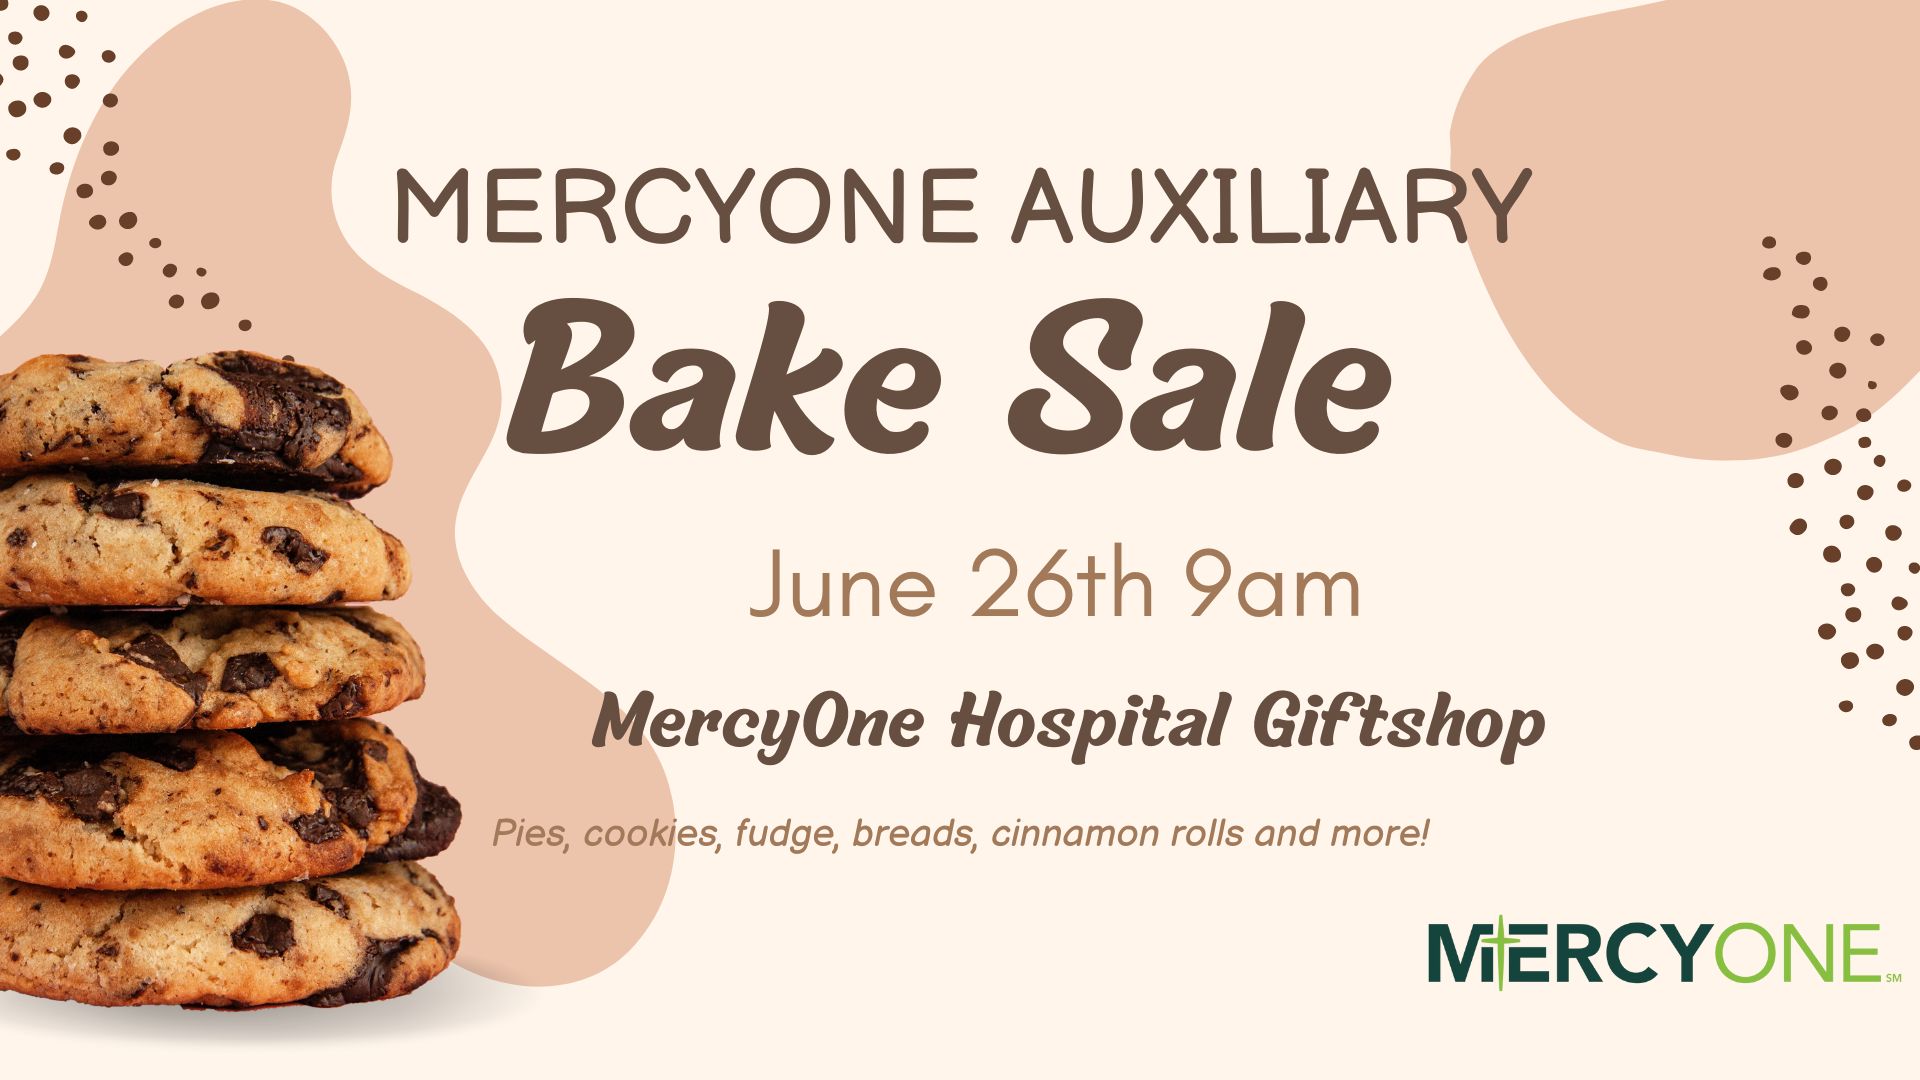 MercyOne Auxiliary Bake Sale June 26th